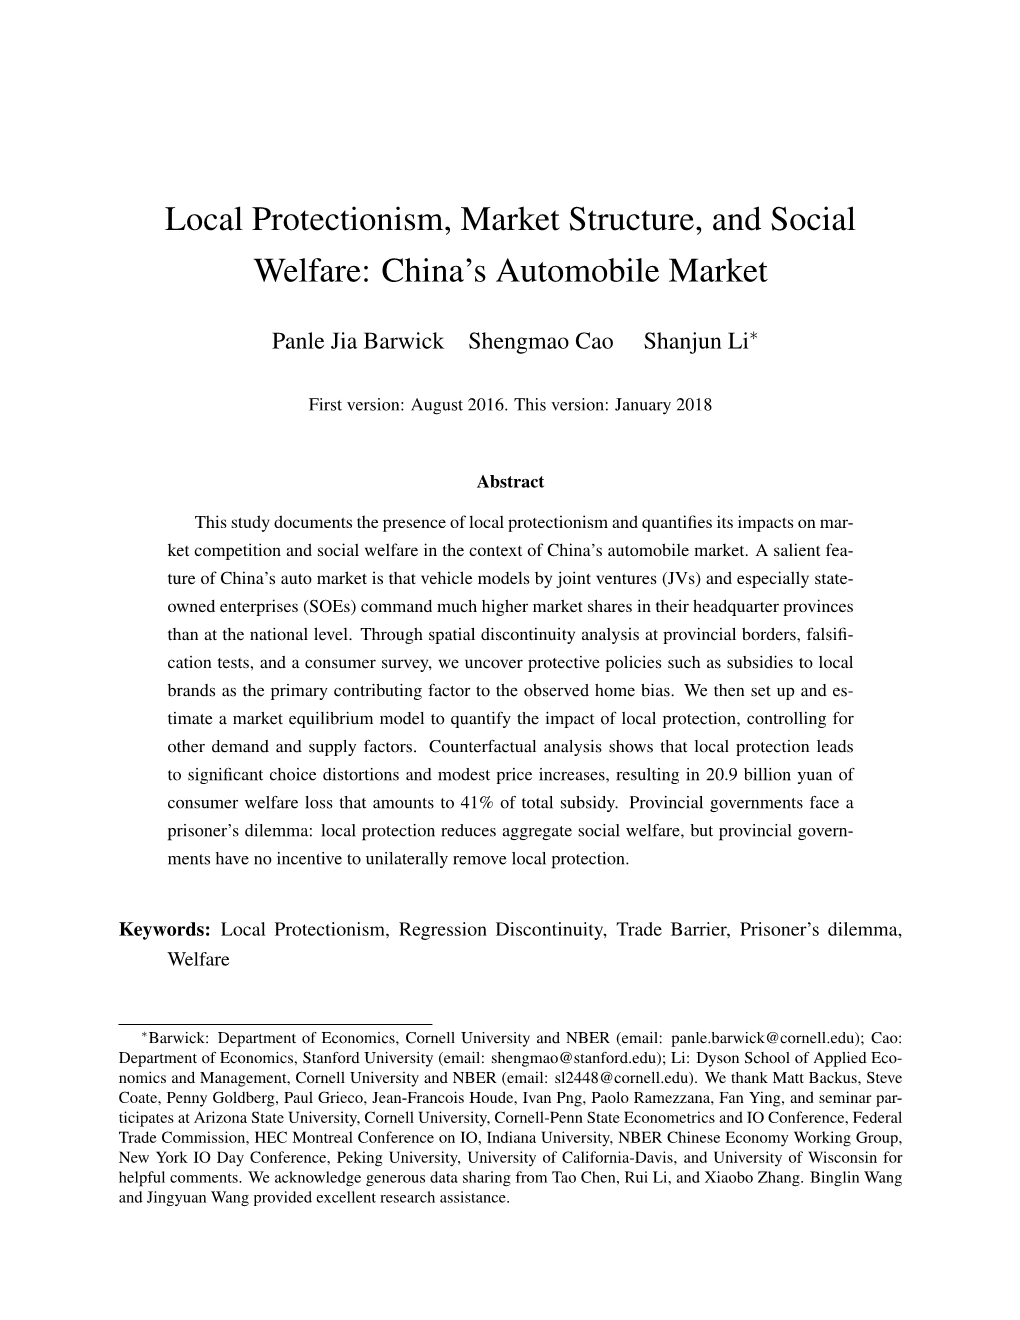 Local Protectionism, Market Structure, and Social Welfare: China’S Automobile Market